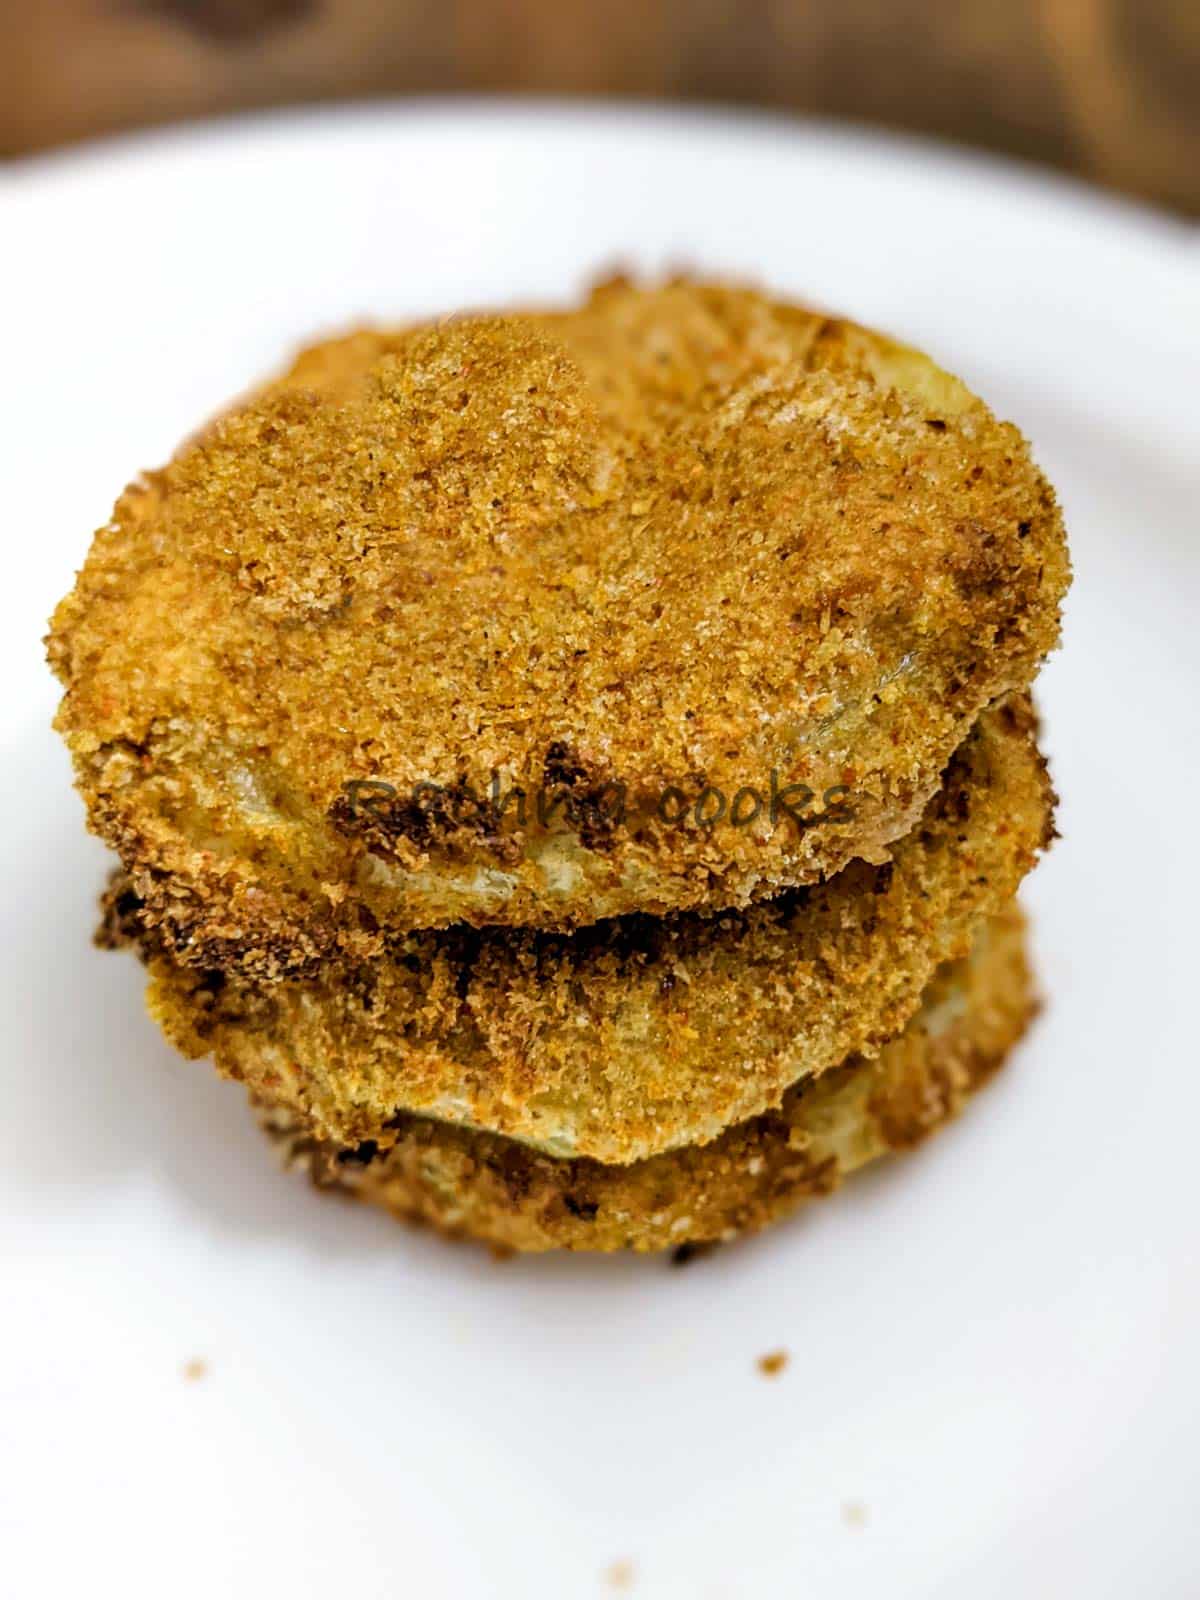 Three air fried green tomatoes piled on top of each other on a white plate.